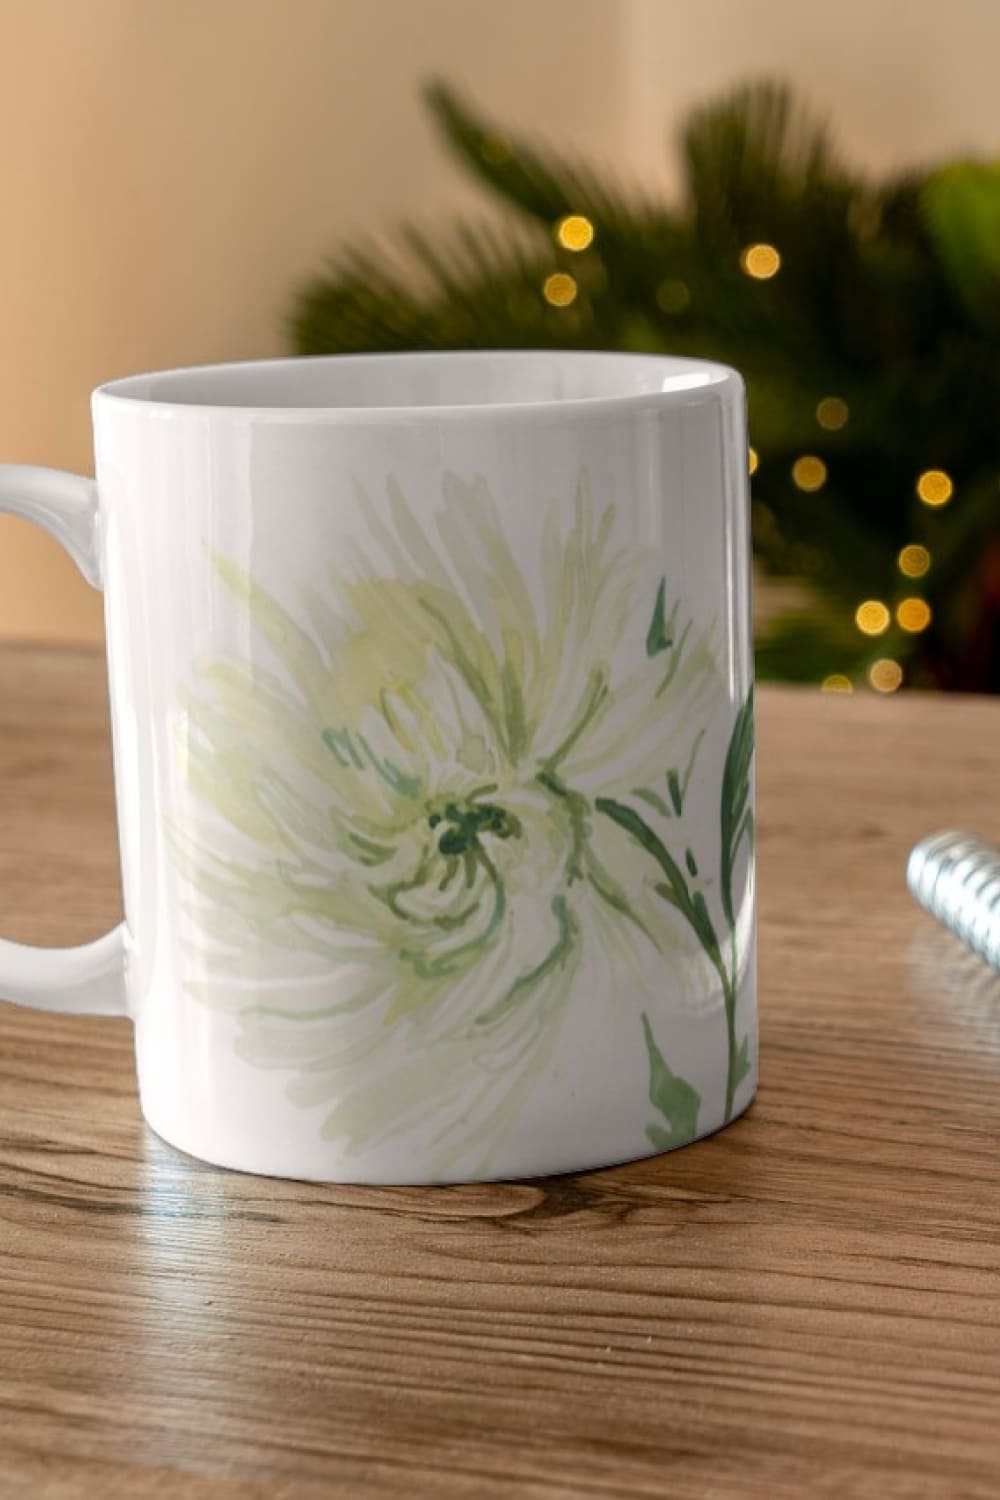 Beautiful flowers for a cup.